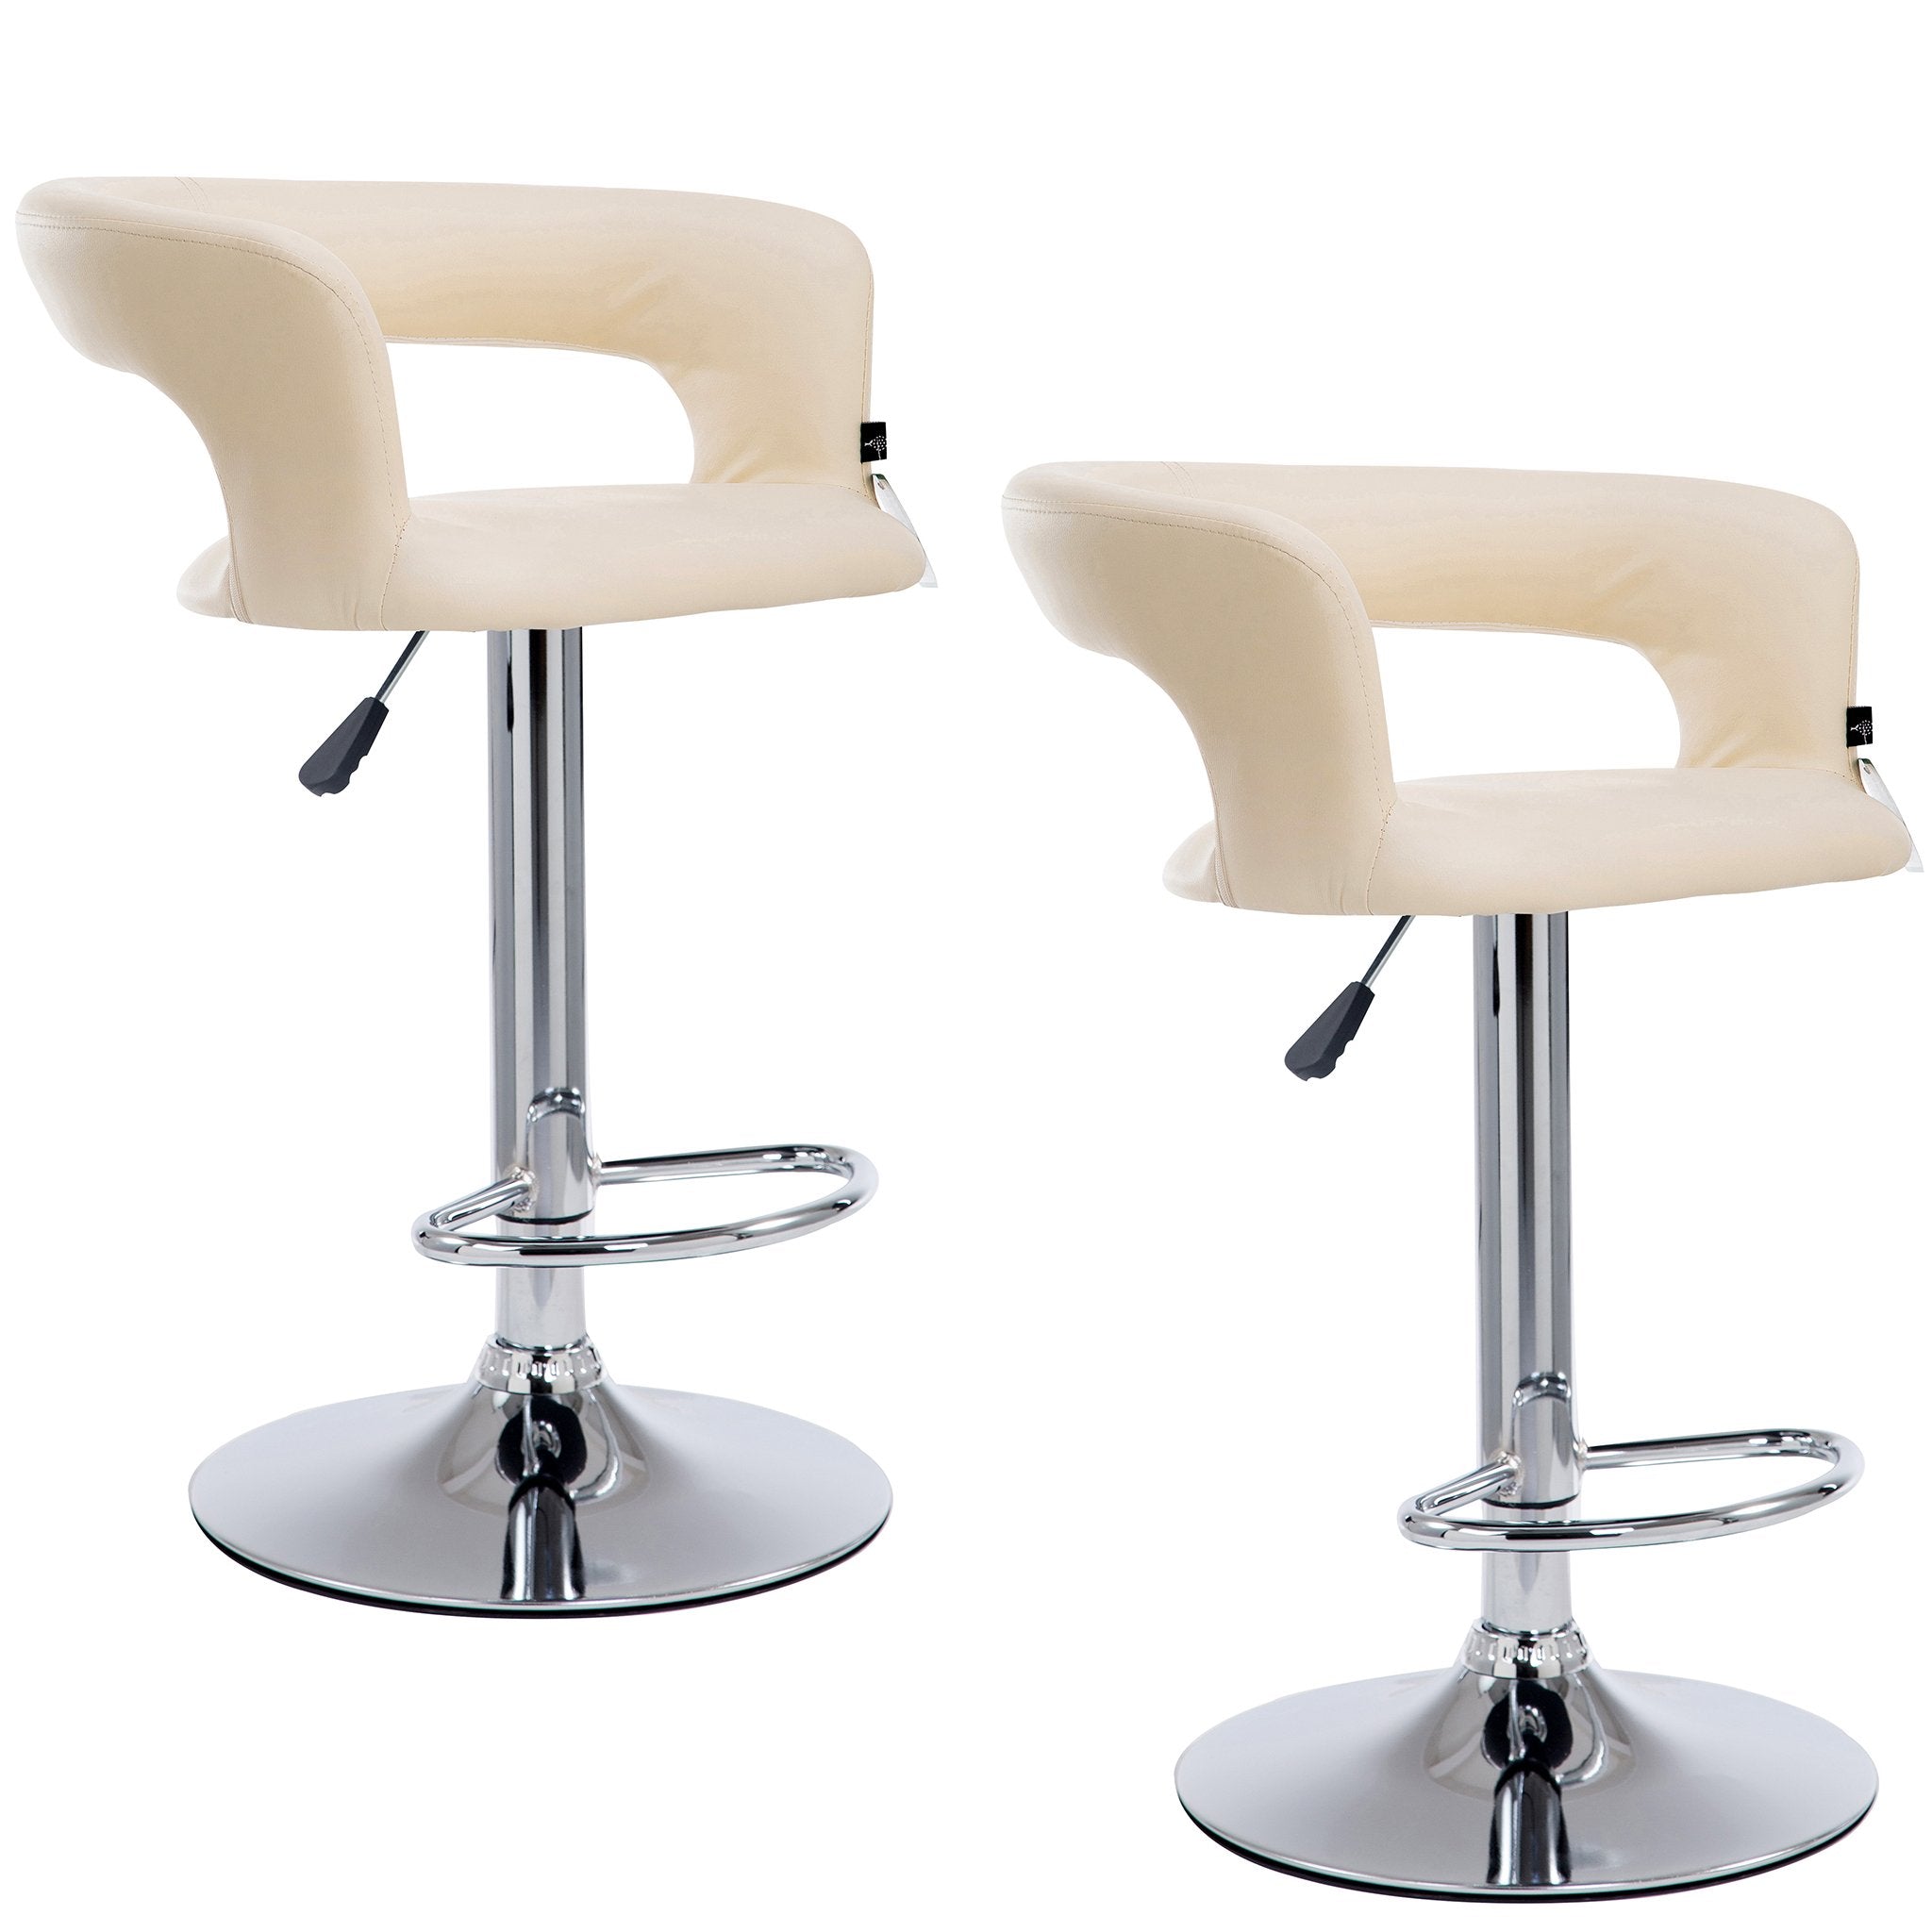 Beige Faux Leather Chrome Base Swivel Bar Stool MB-203 in Pair